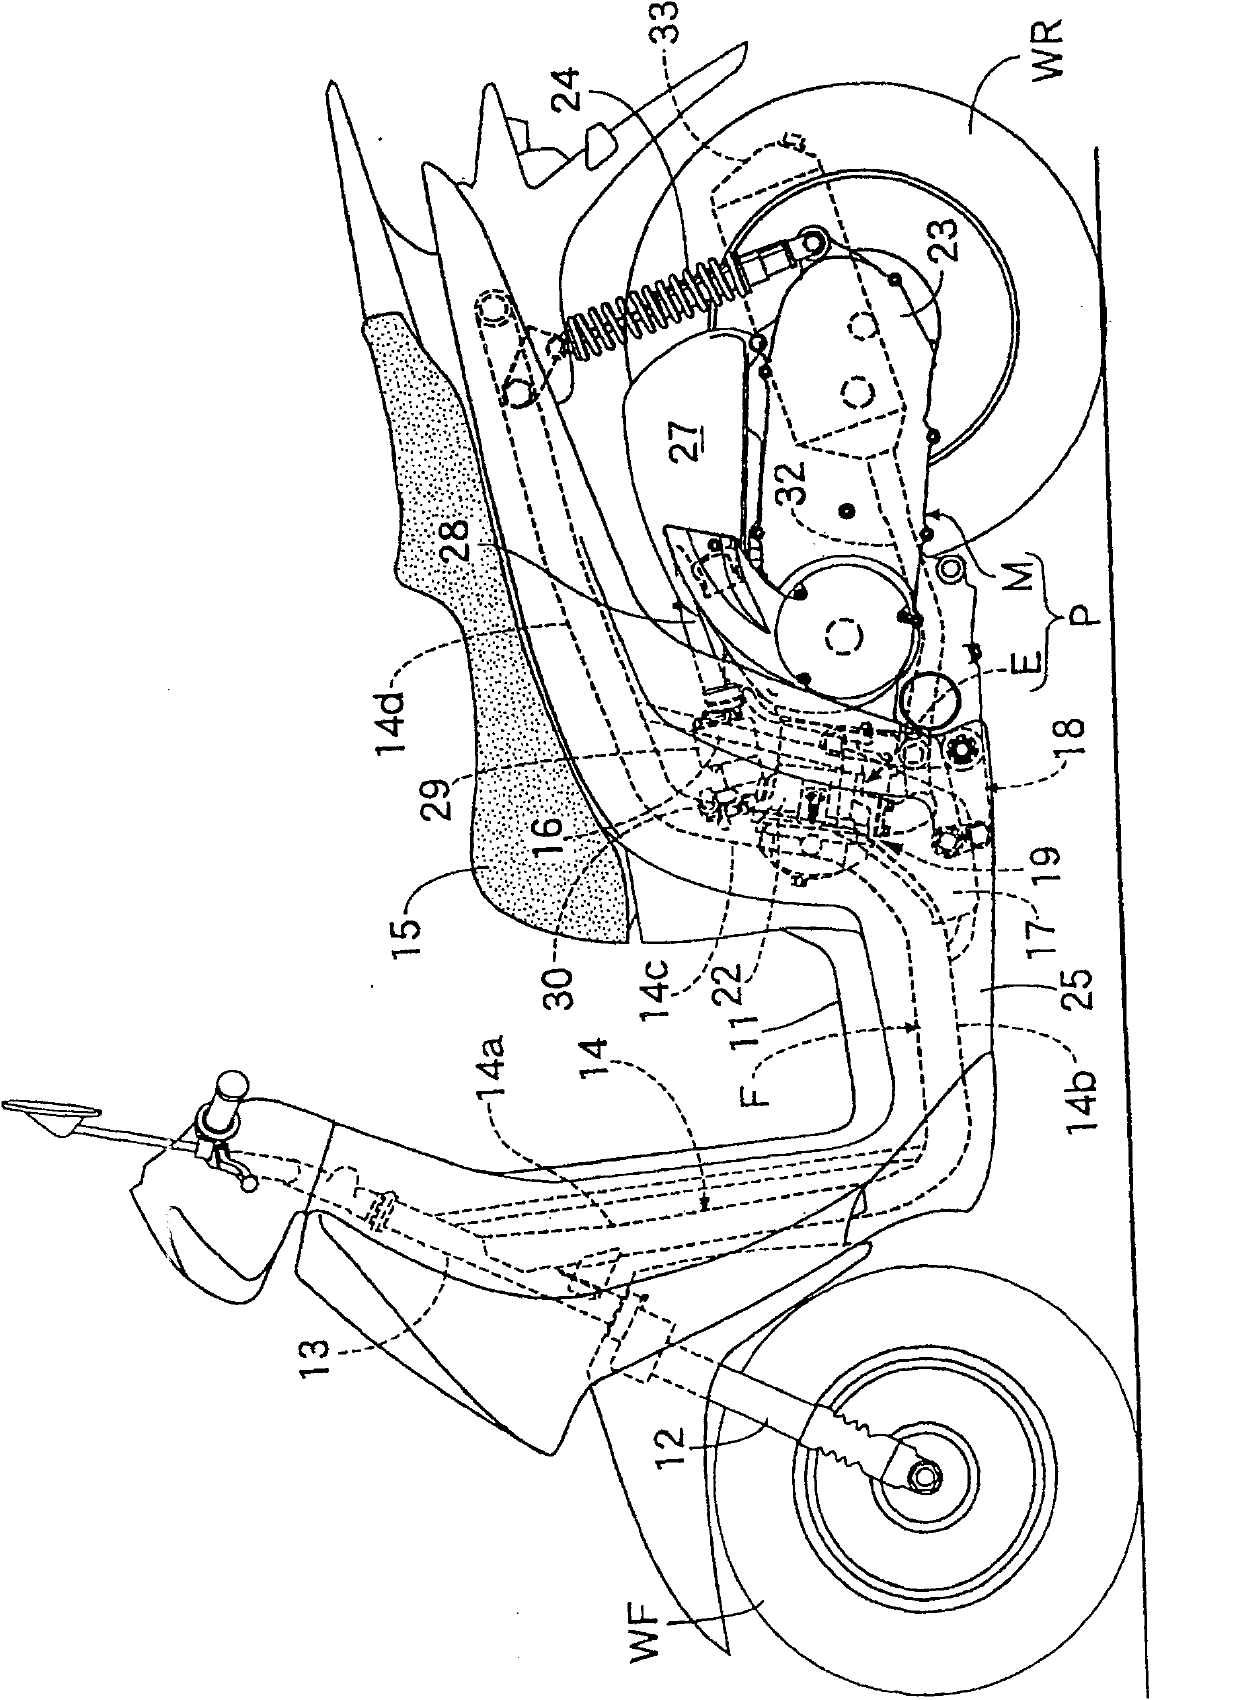 Exhaust system for motorcycle